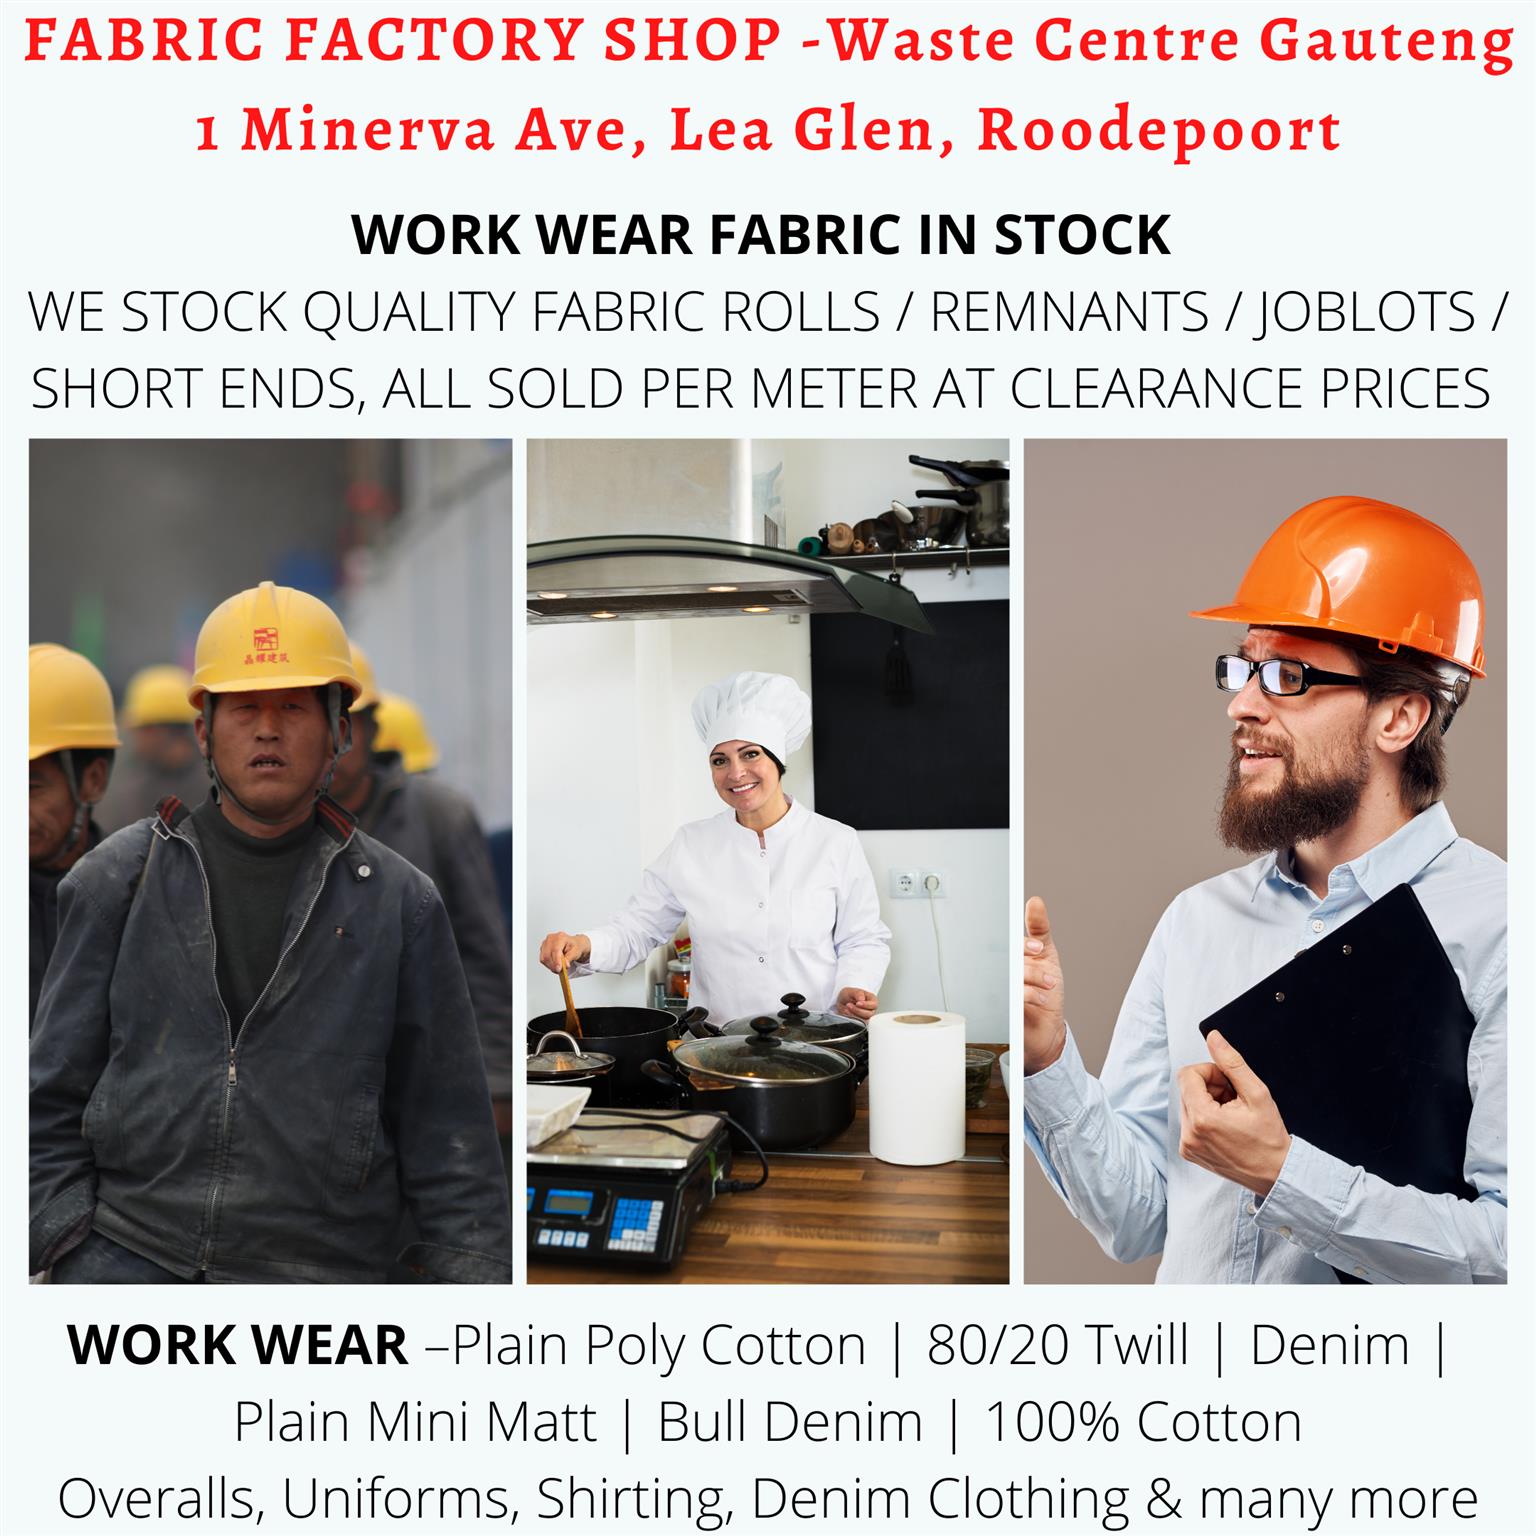 UPHOLSTERY  & CURTAIN FABRIC FACTORY SHOP - NOW OPEN 